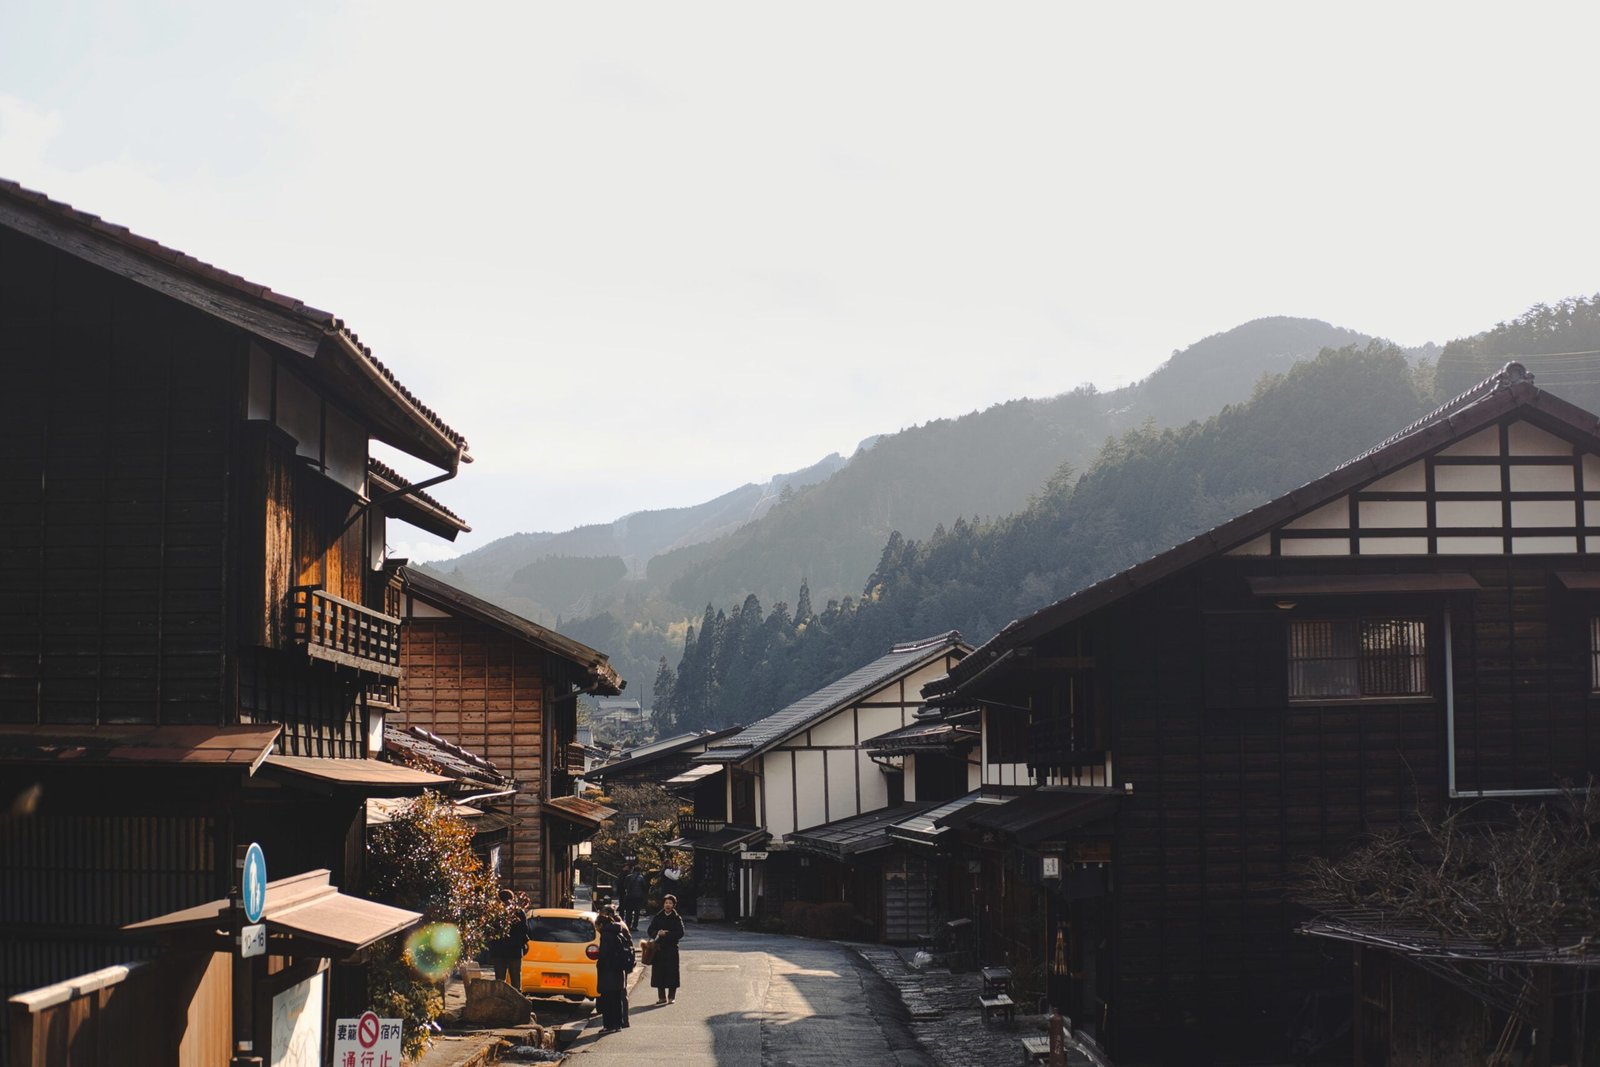 A photograph of a village street in the mountains